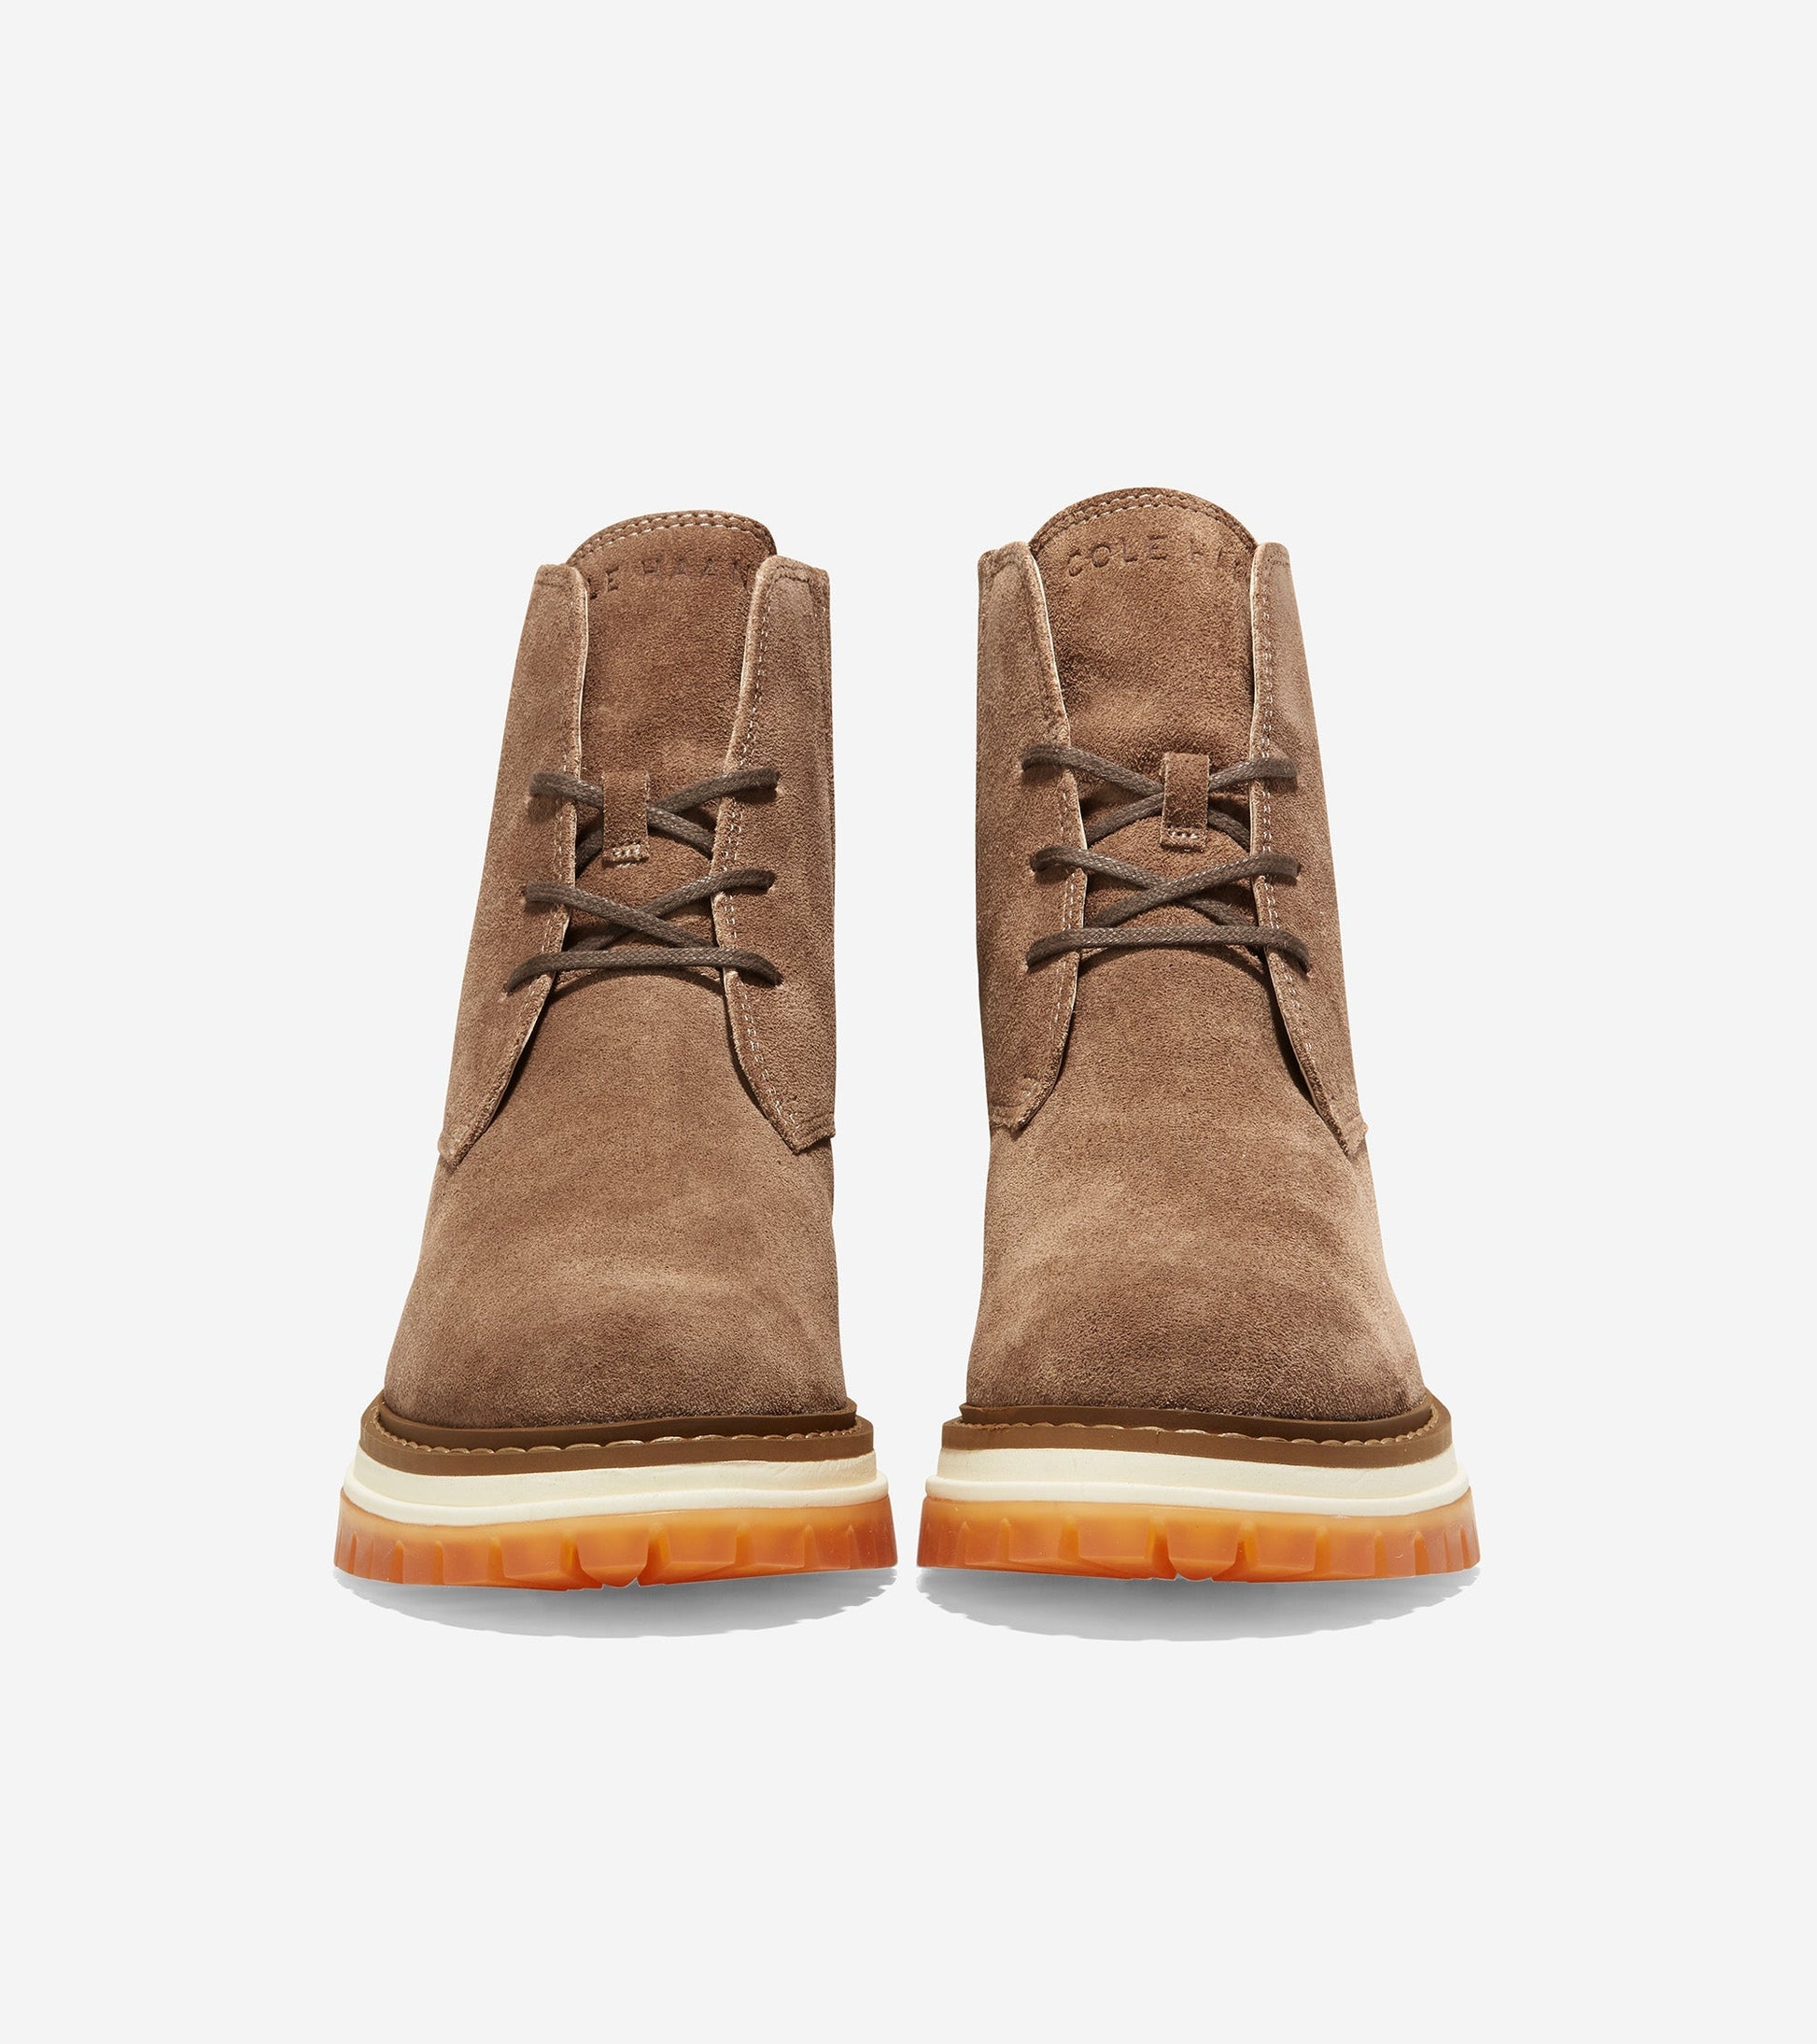 Tahoe Featherfeel Lace-Up Boot